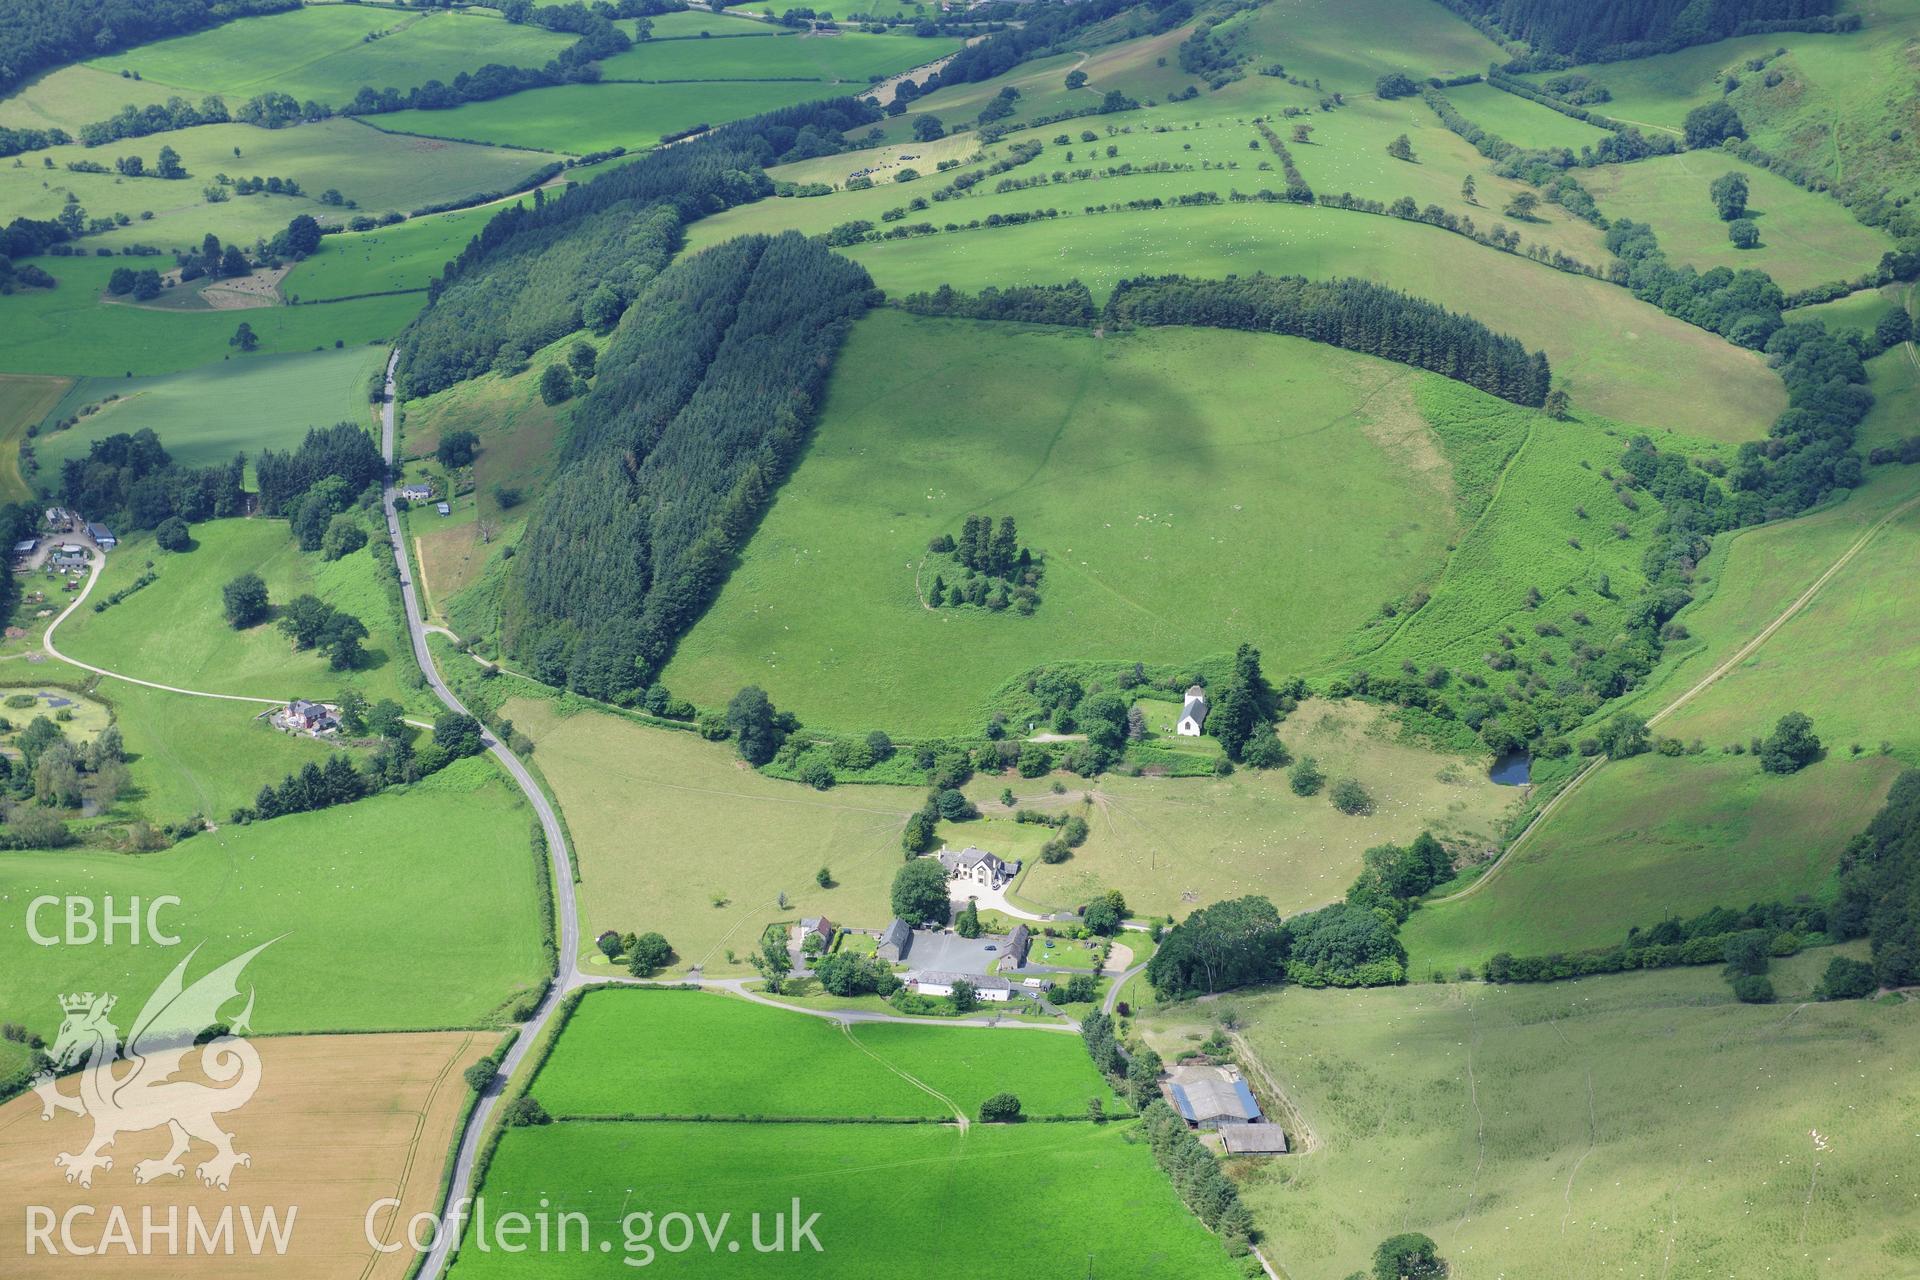 RCAHMW colour oblique photograph of Pilleth, battle site, landscape from east. Taken by Toby Driver on 27/07/2012.